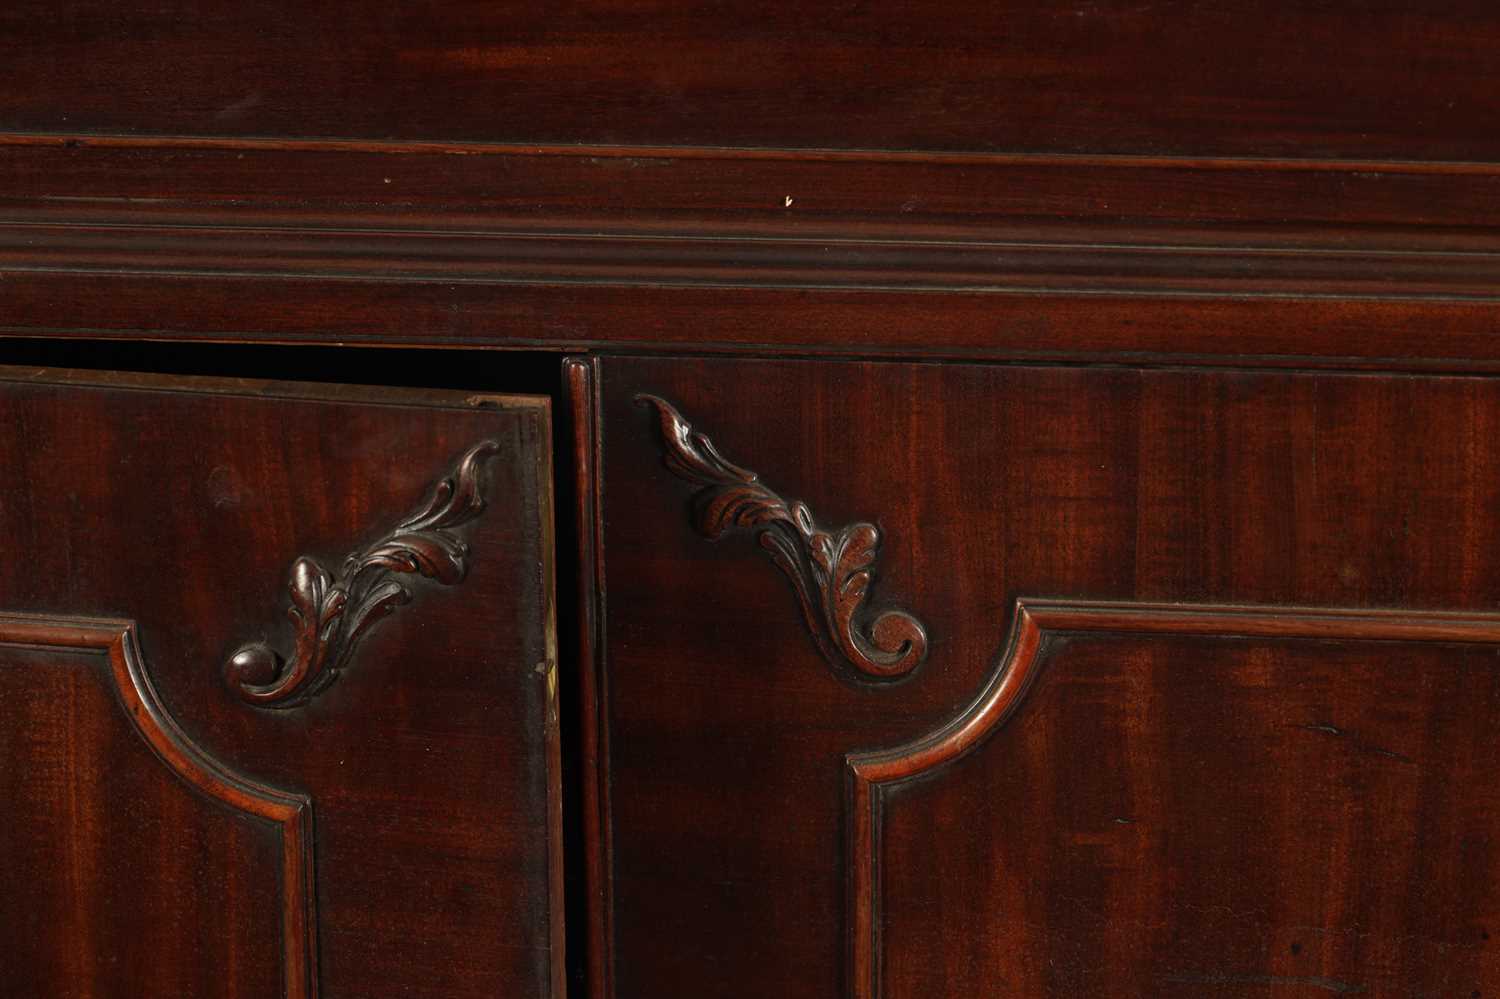 A FINE GEORGE III CHIPPENDALE DESIGN MAHOGANY SECRETAIRE CHEST ON CABINET FROM THE LILFORD ESTATE - Image 5 of 8